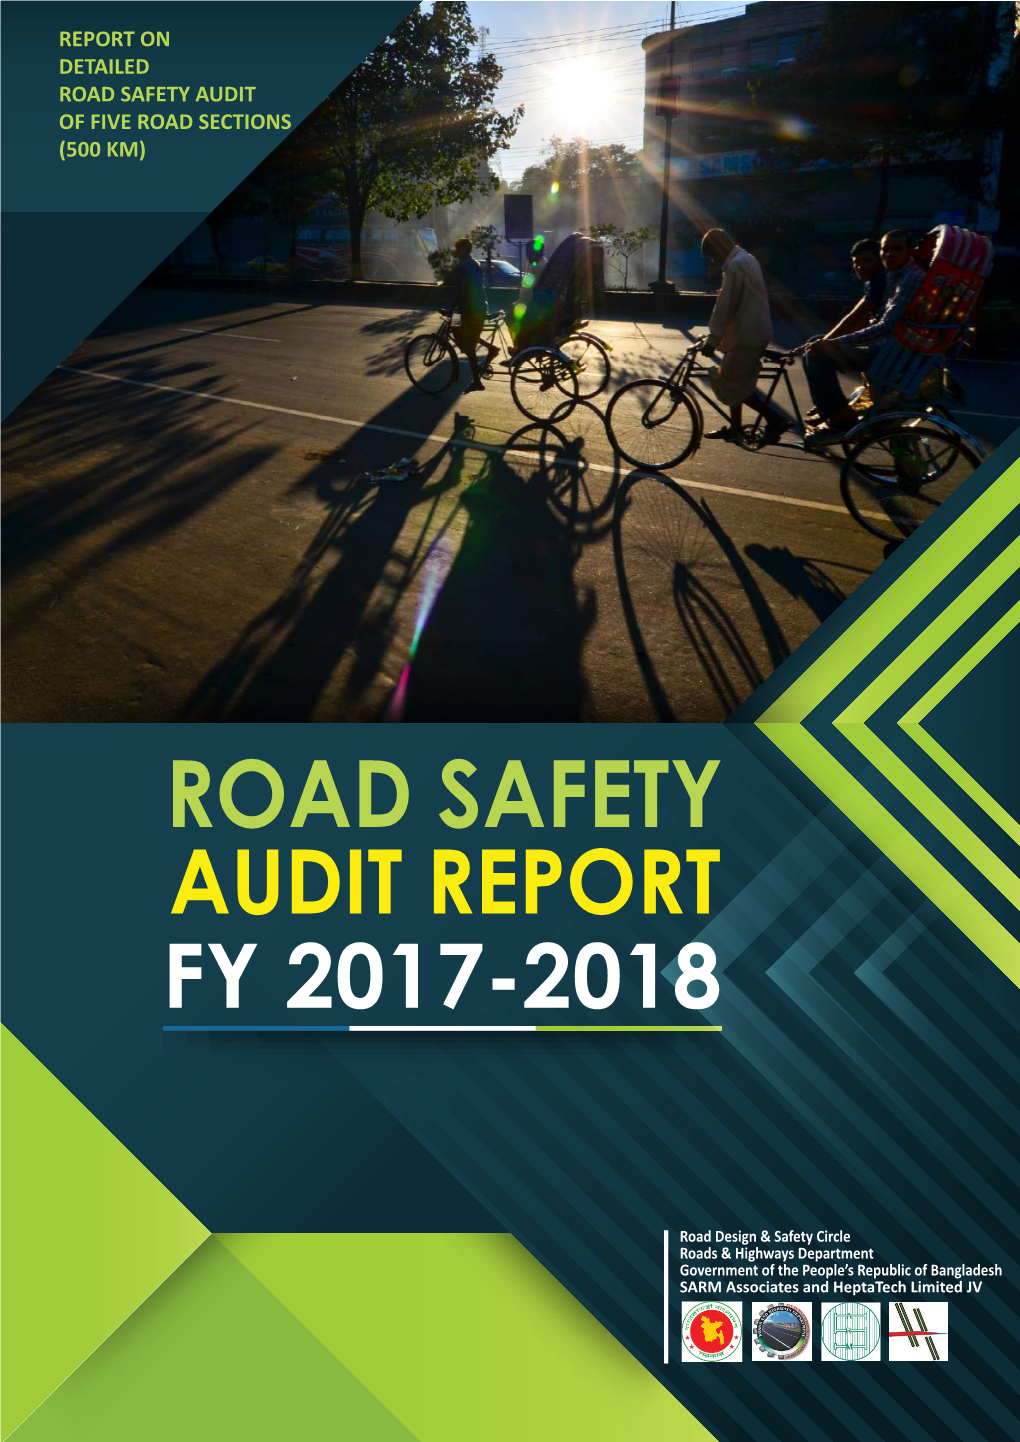 Road Safety Audit of Five Road Sections (500 Km)